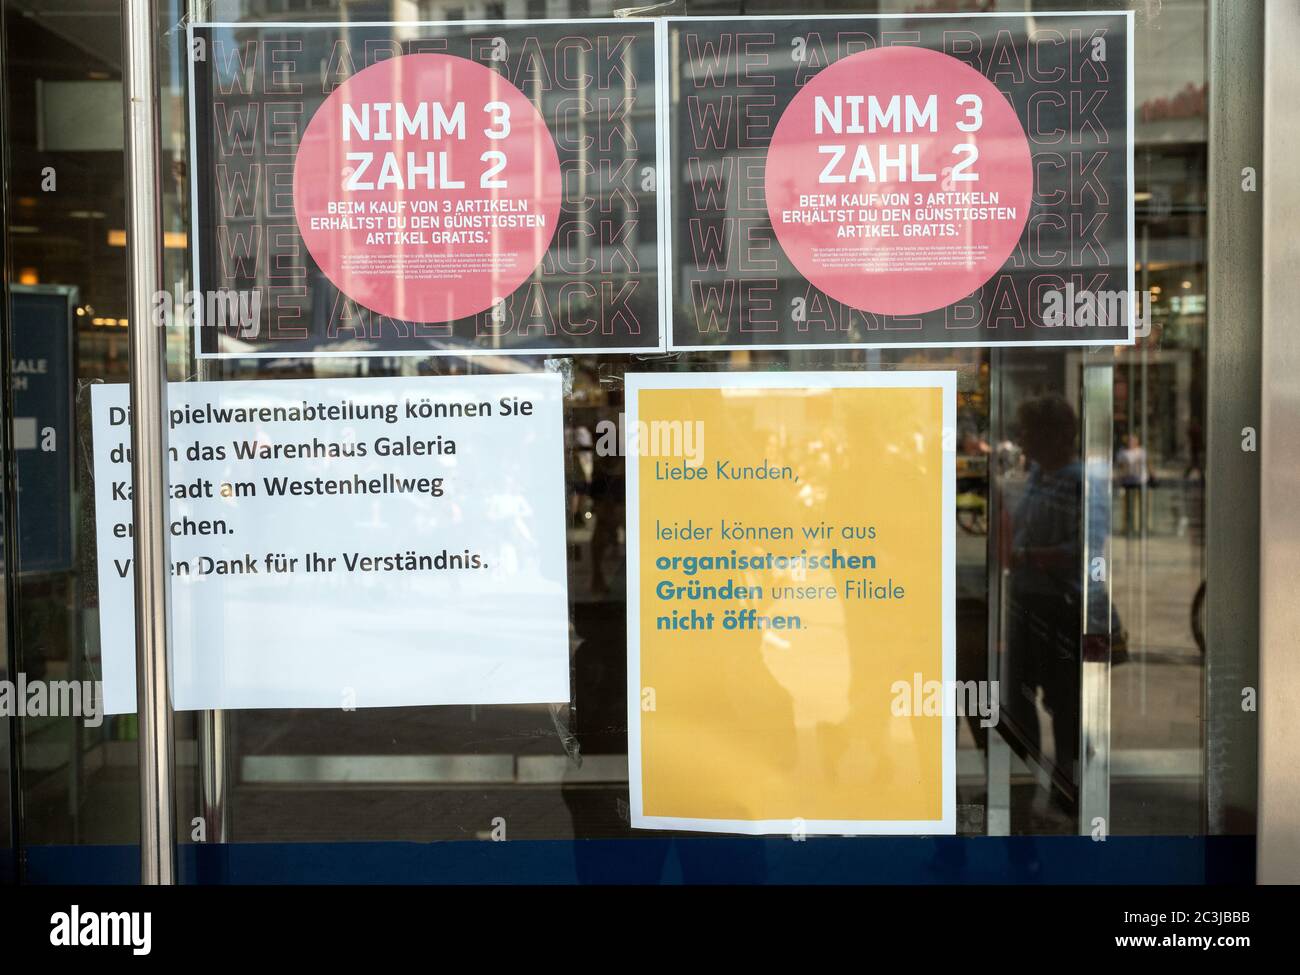 Dortmund, Germany. 20th June, 2020. The doors of a branch of Karstadt Sports are locked. In addition to the planned closure of dozens of branches of the department store chain Galeria Karstadt Kaufhof, 20 of the 30 branches of the Karstadt Sports subsidiary are also to be closed. Credit: Bernd Thissen/dpa/Alamy Live News Stock Photo